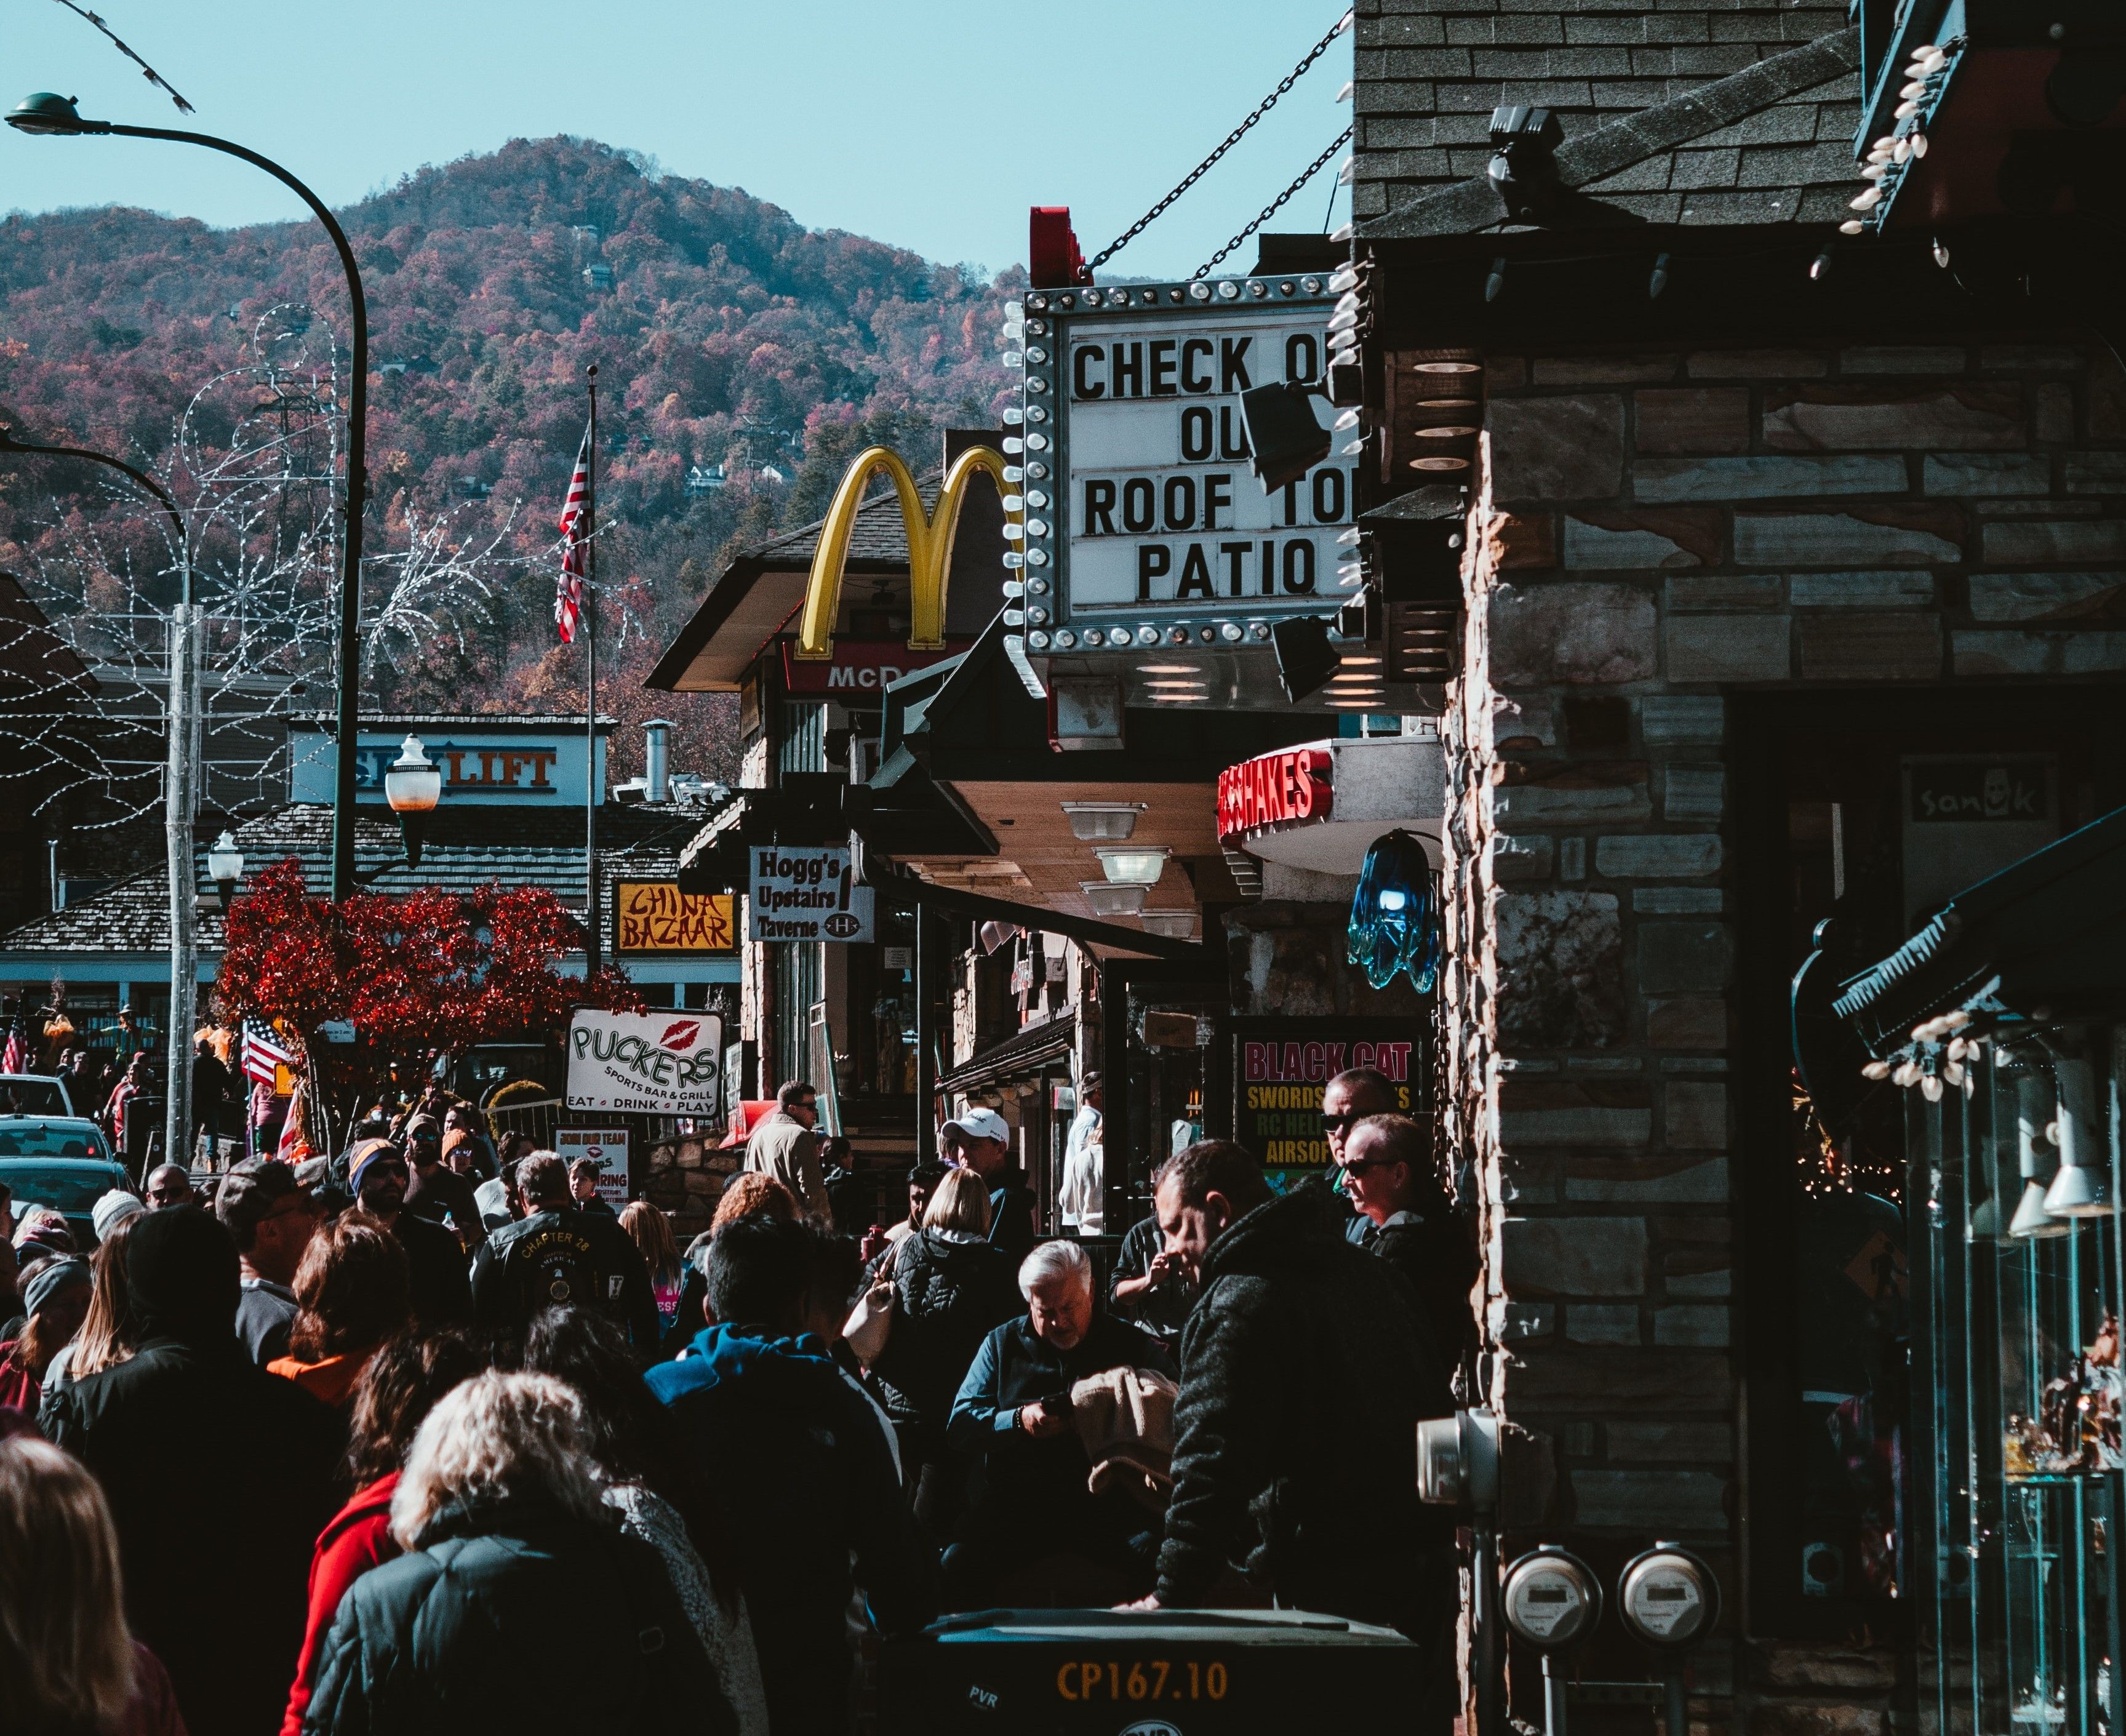 A crowd of people on the streets of Gatlinburg, Tennessee, USA